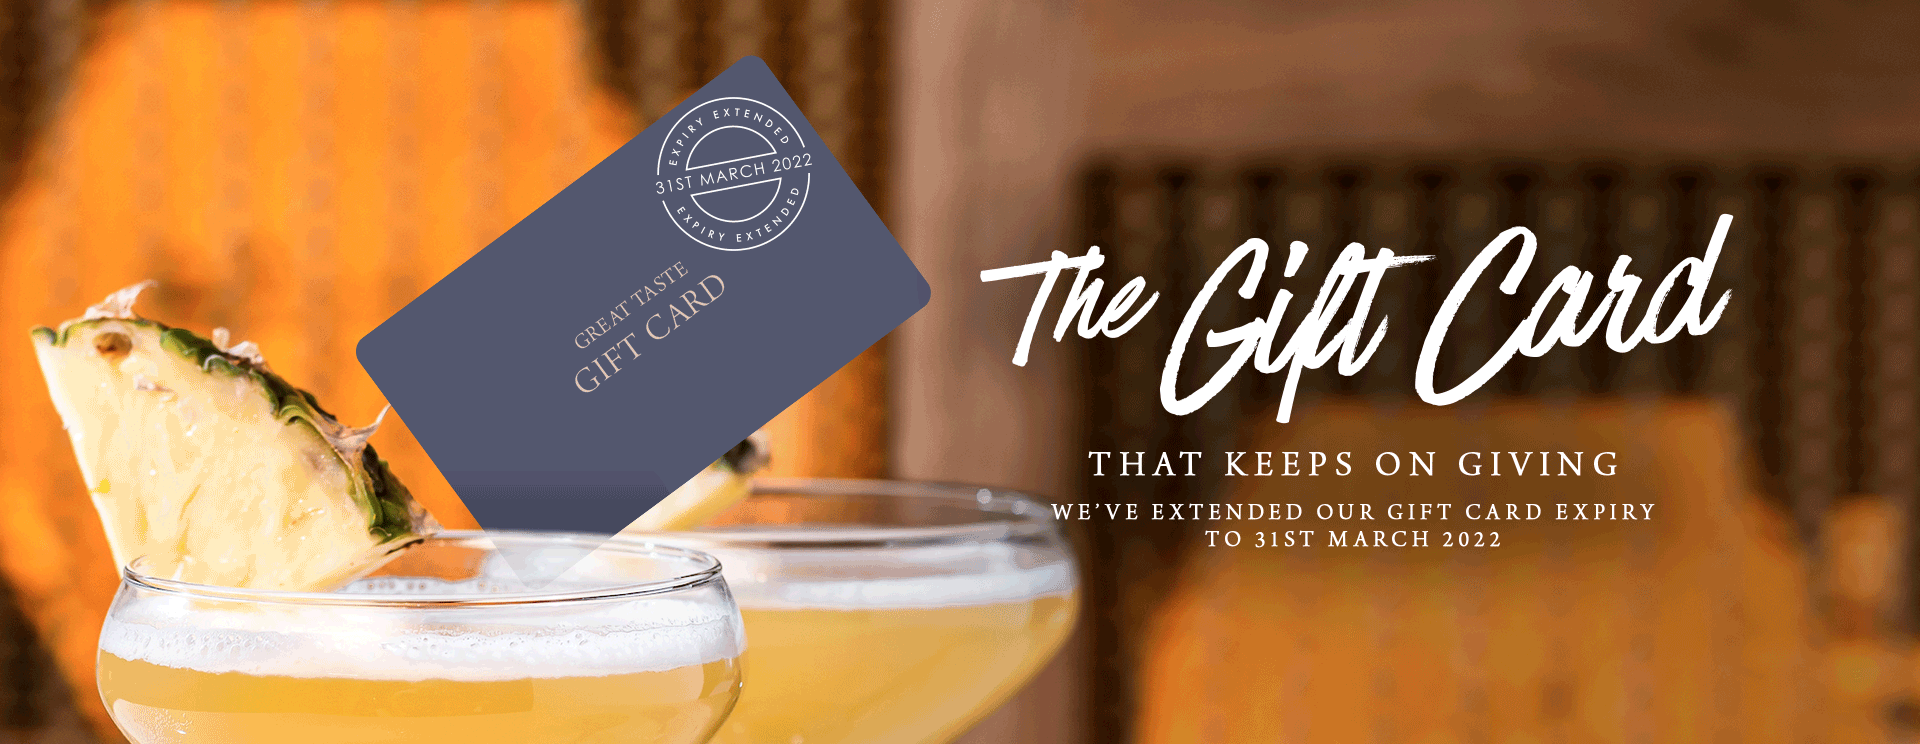 Give the gift of a gift card at The Black Horse